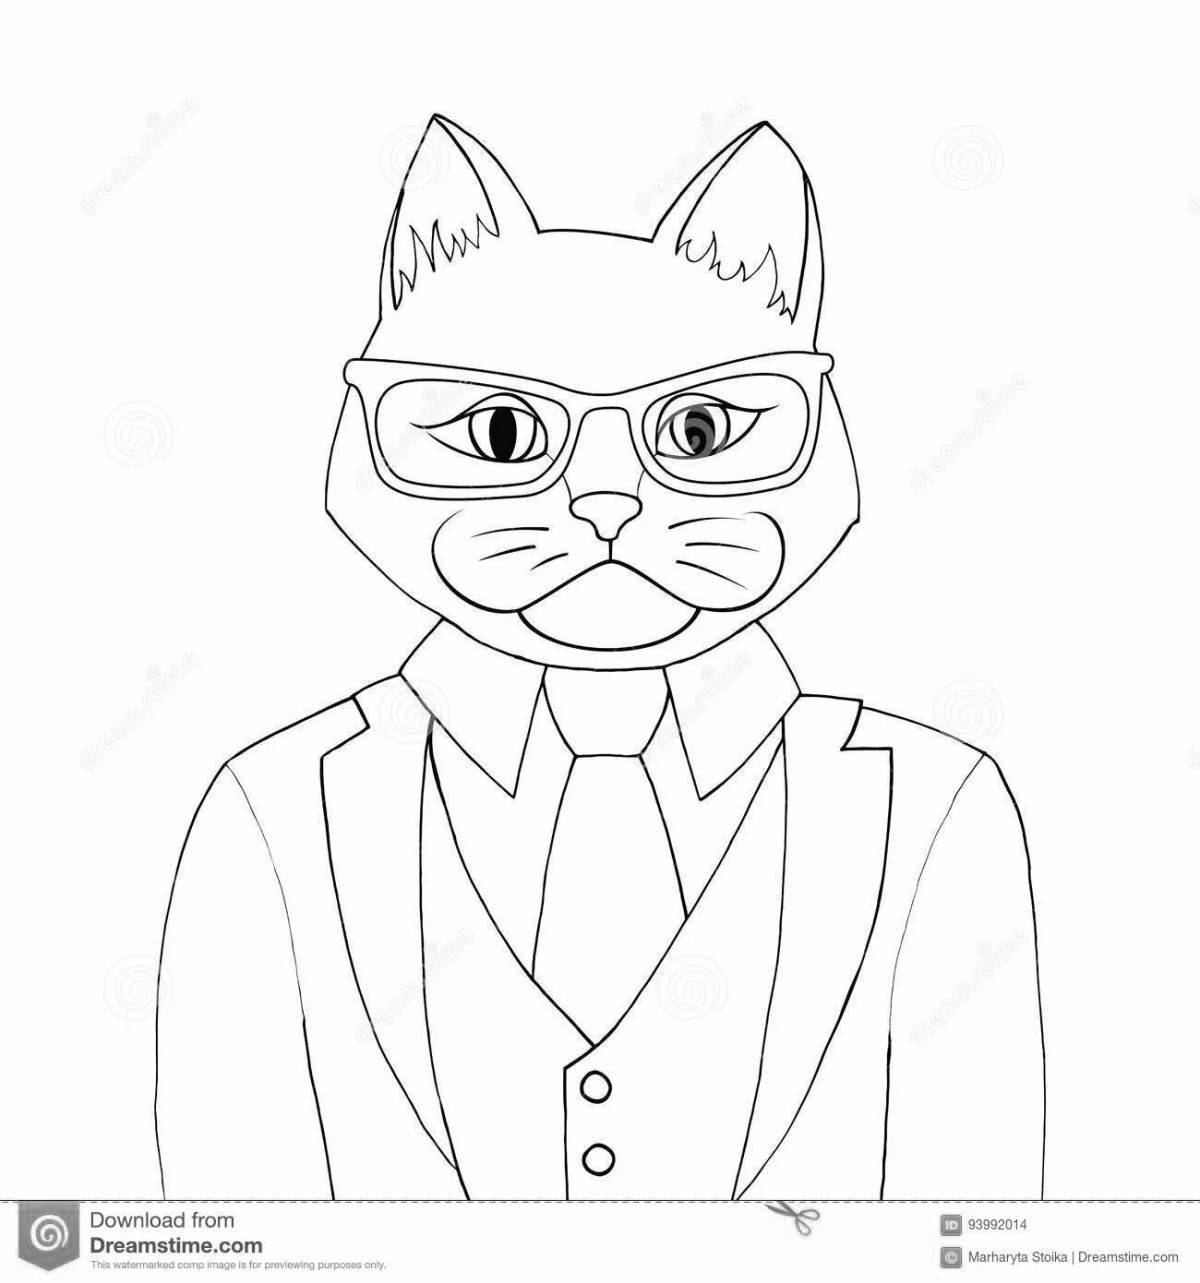 Majestic cat-man coloring page